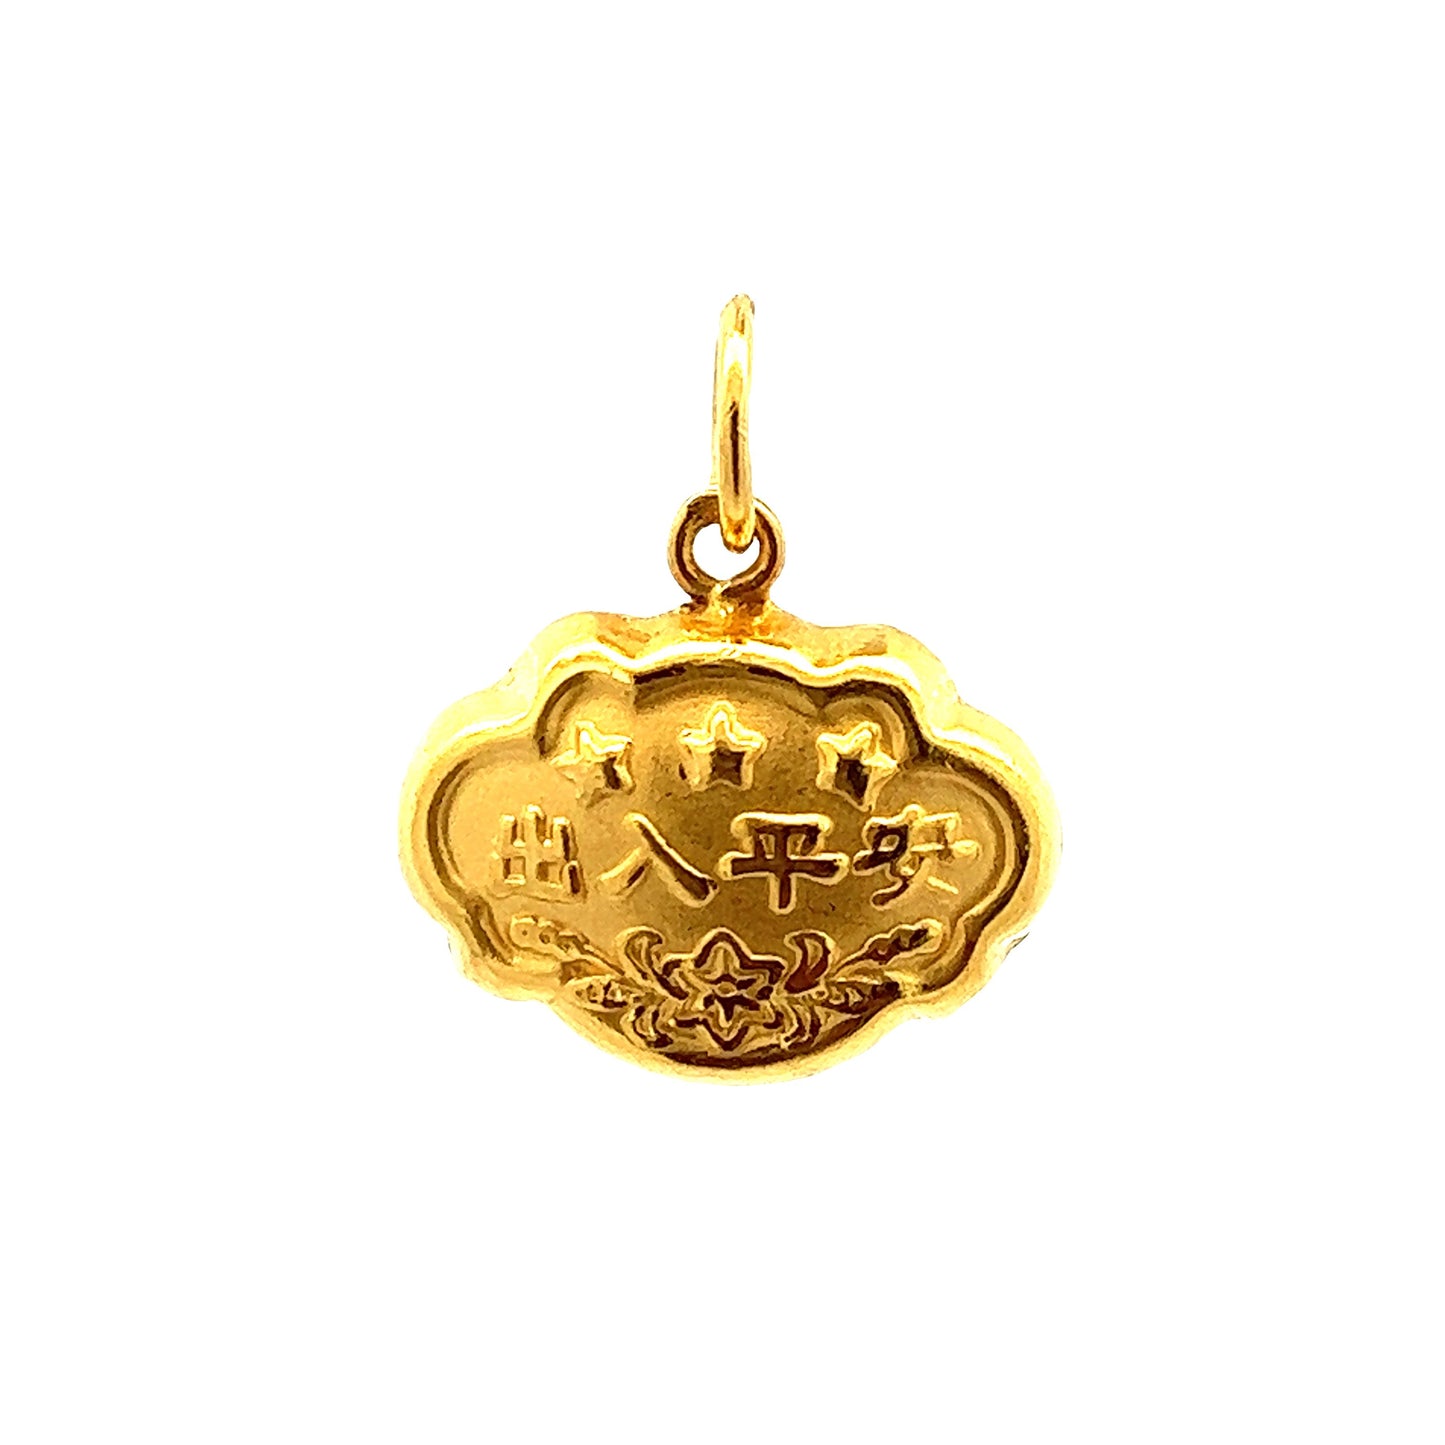 GOLD PENDANT ( 22K ) ( 2.4g ) - 0011929 Chain sold separately